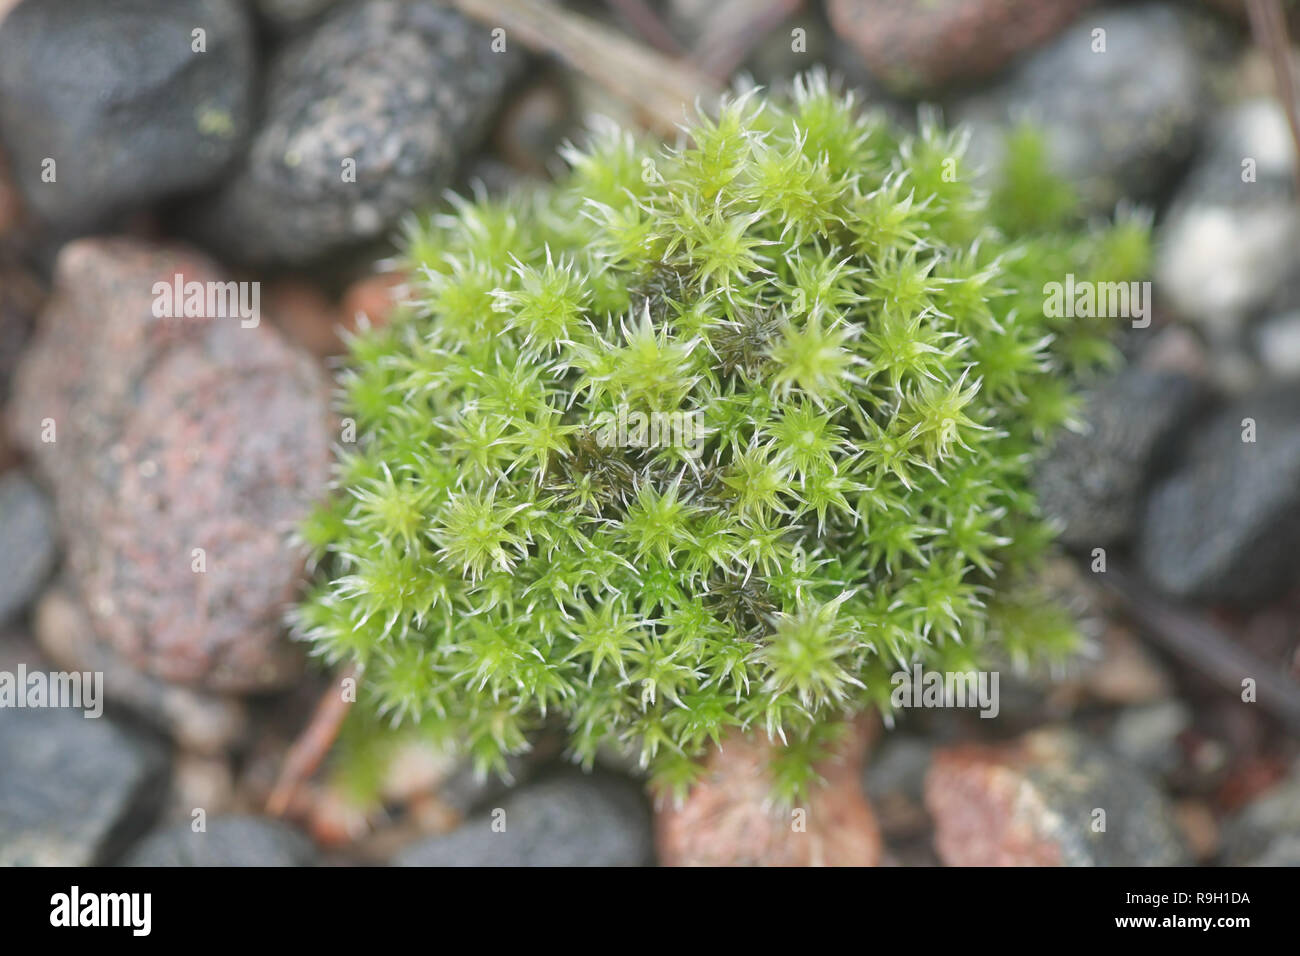 https://www.alamy.com/silver-moss-or-hoary-fringe-moss-racomitrium-canescens-image229641030.html